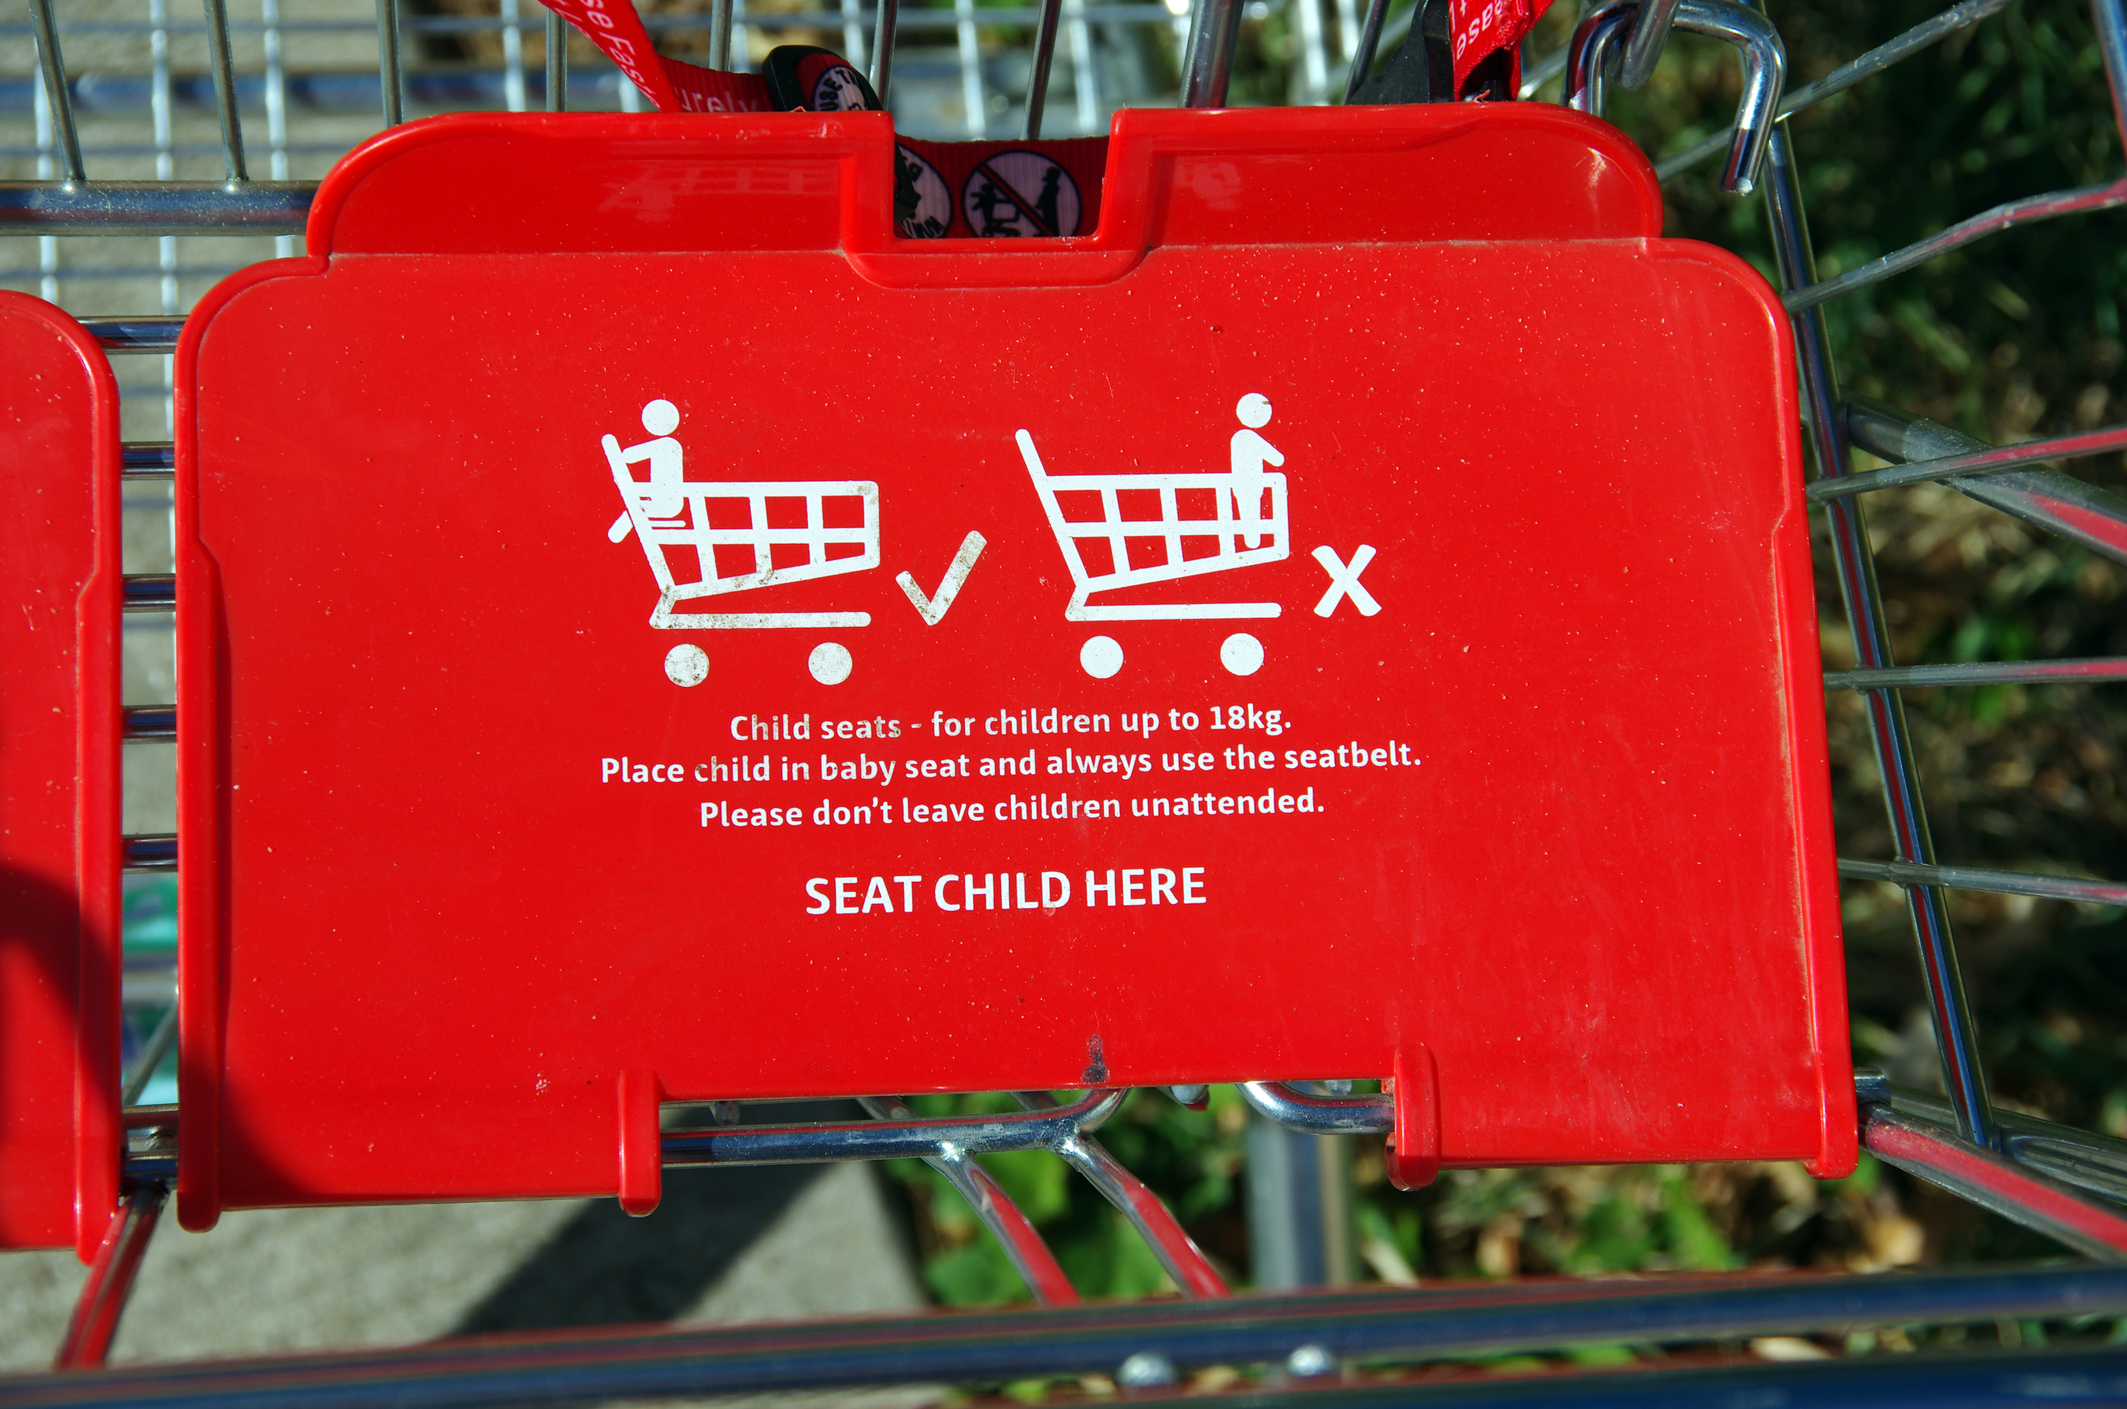 seat child here sign on the cart